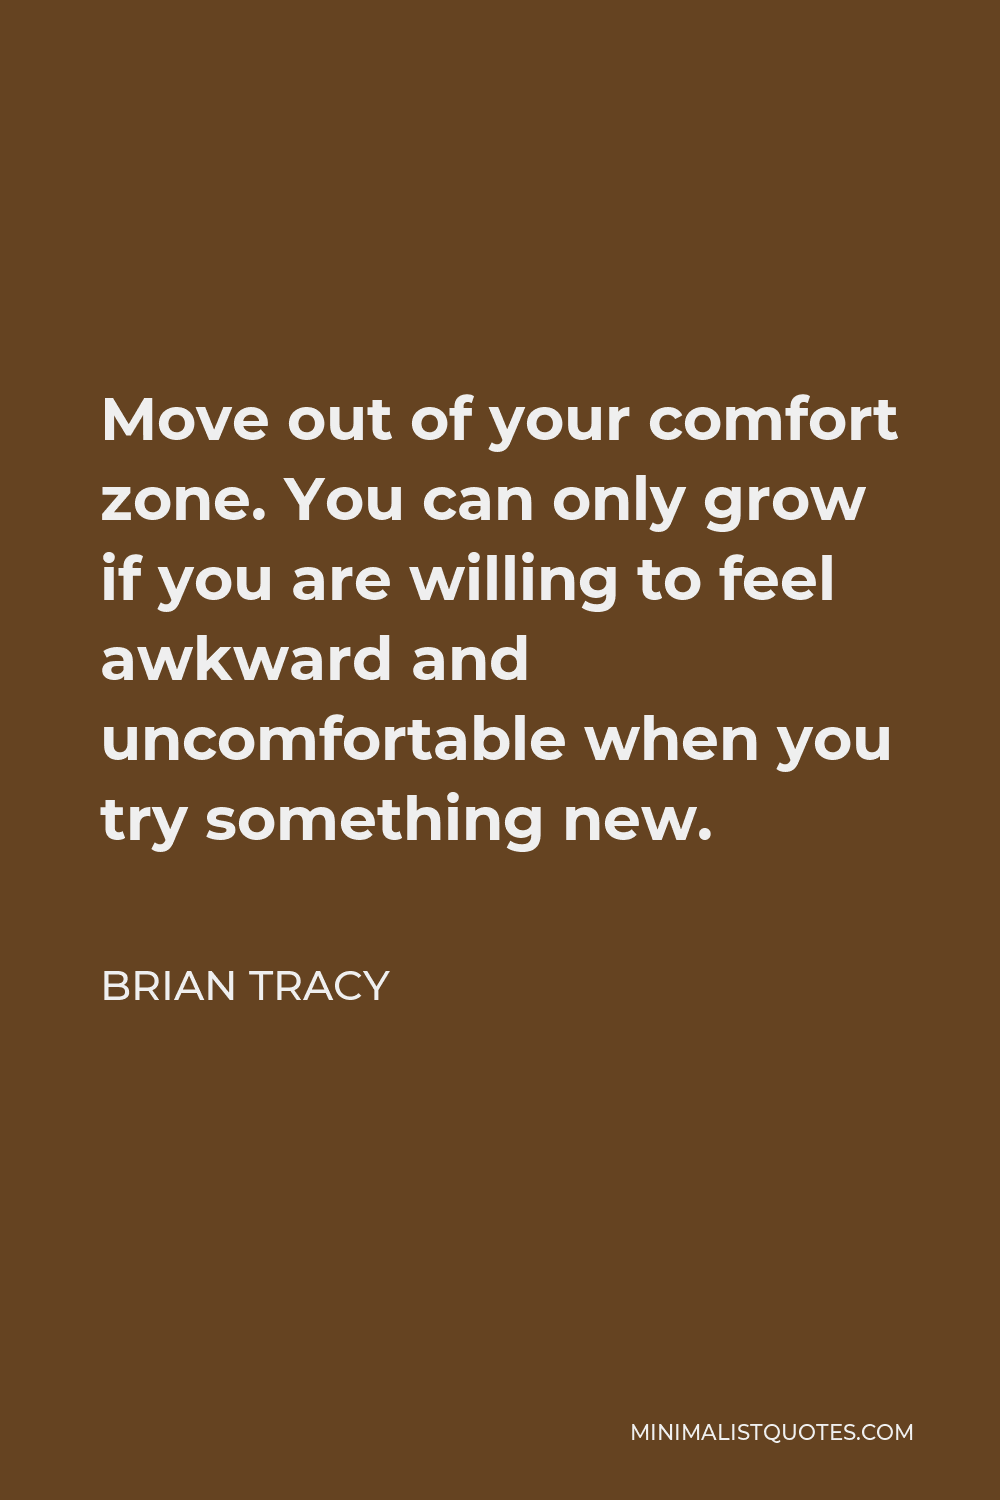 Brian Tracy Quote - Move out of your comfort zone. You can only grow if you are willing to feel awkward and uncomfortable when you try something new.